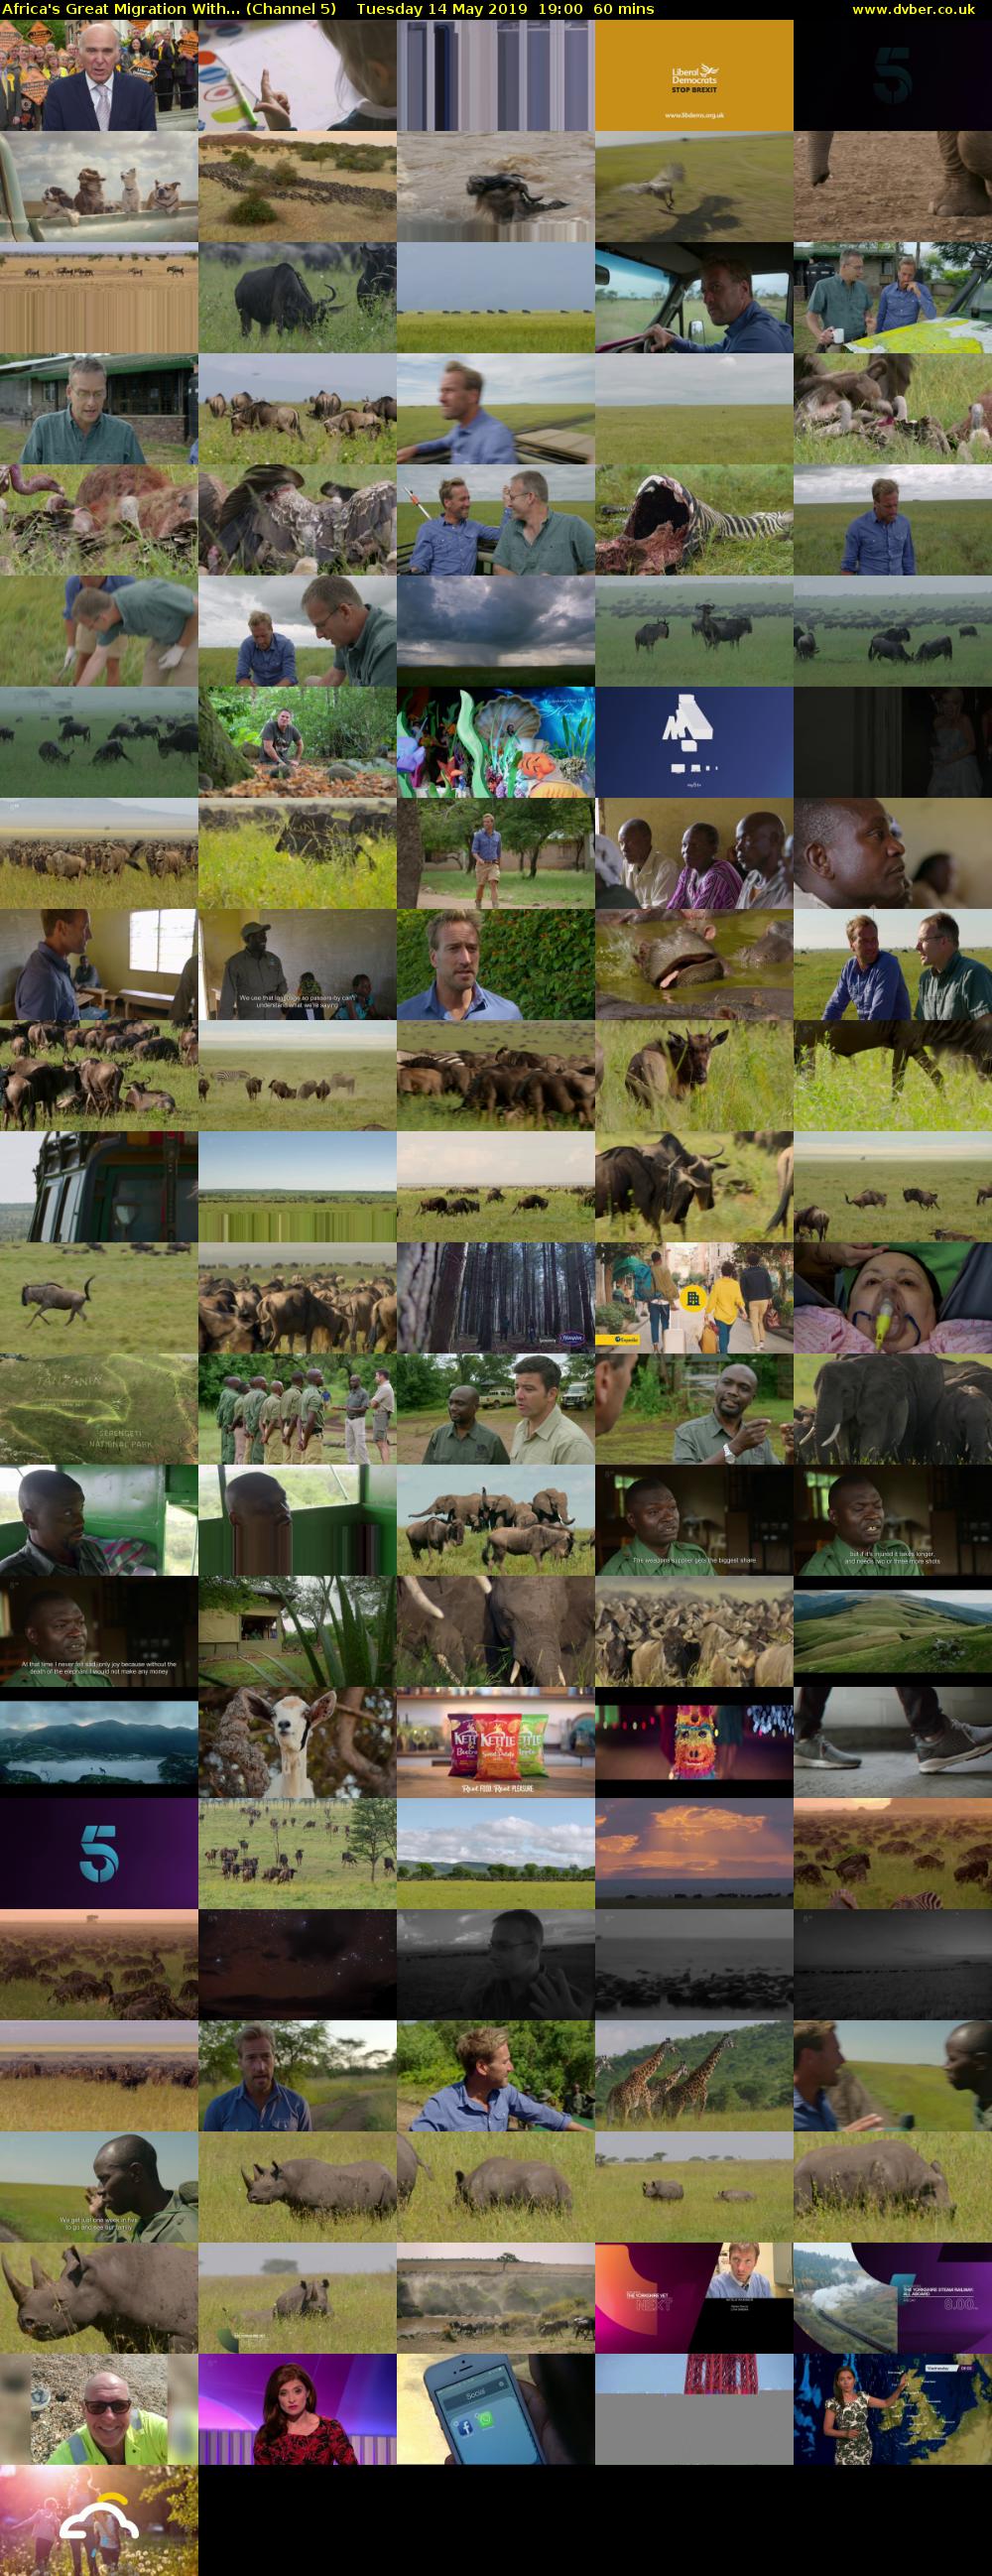 Africa's Great Migration With... (Channel 5) Tuesday 14 May 2019 19:00 - 20:00